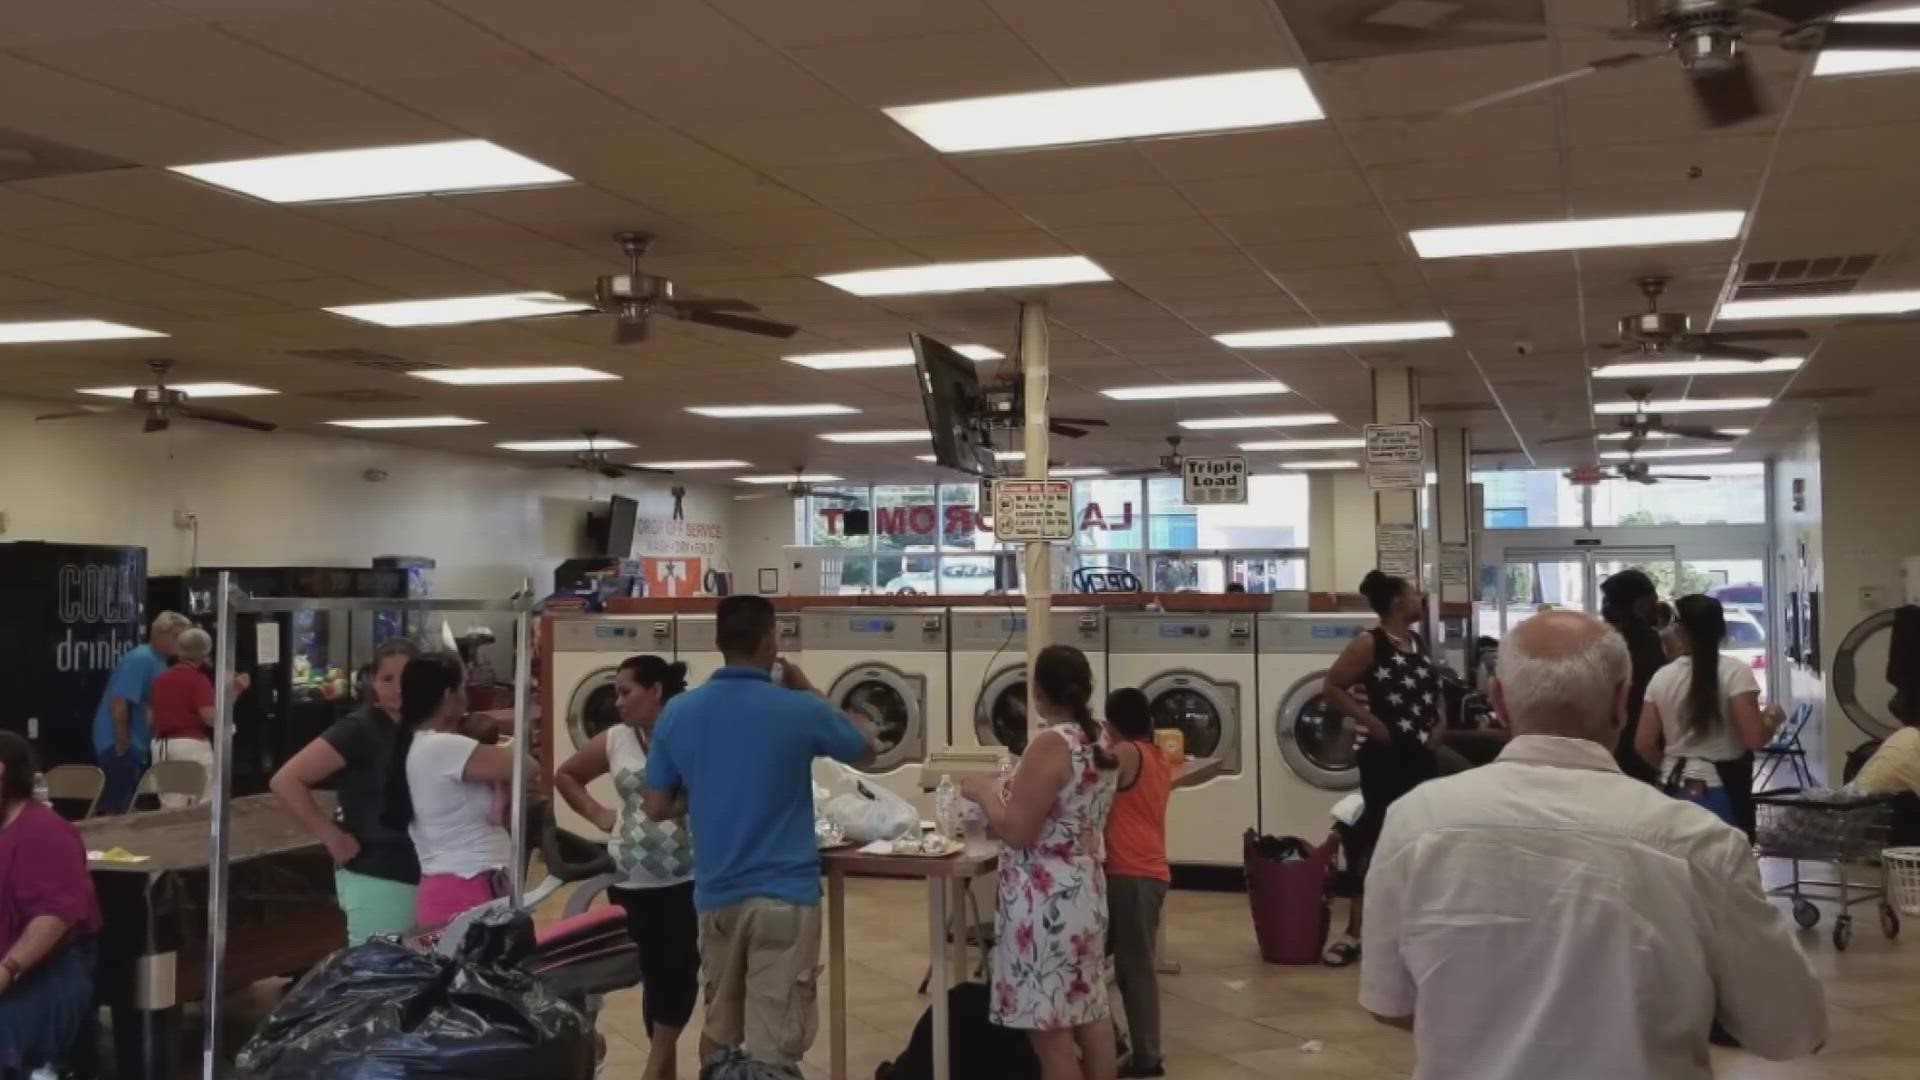 Mustafa Freeman owns the Wash House Laundry Center and on the first Tuesday of every month, he gives people a chance to wash their clothes for free.